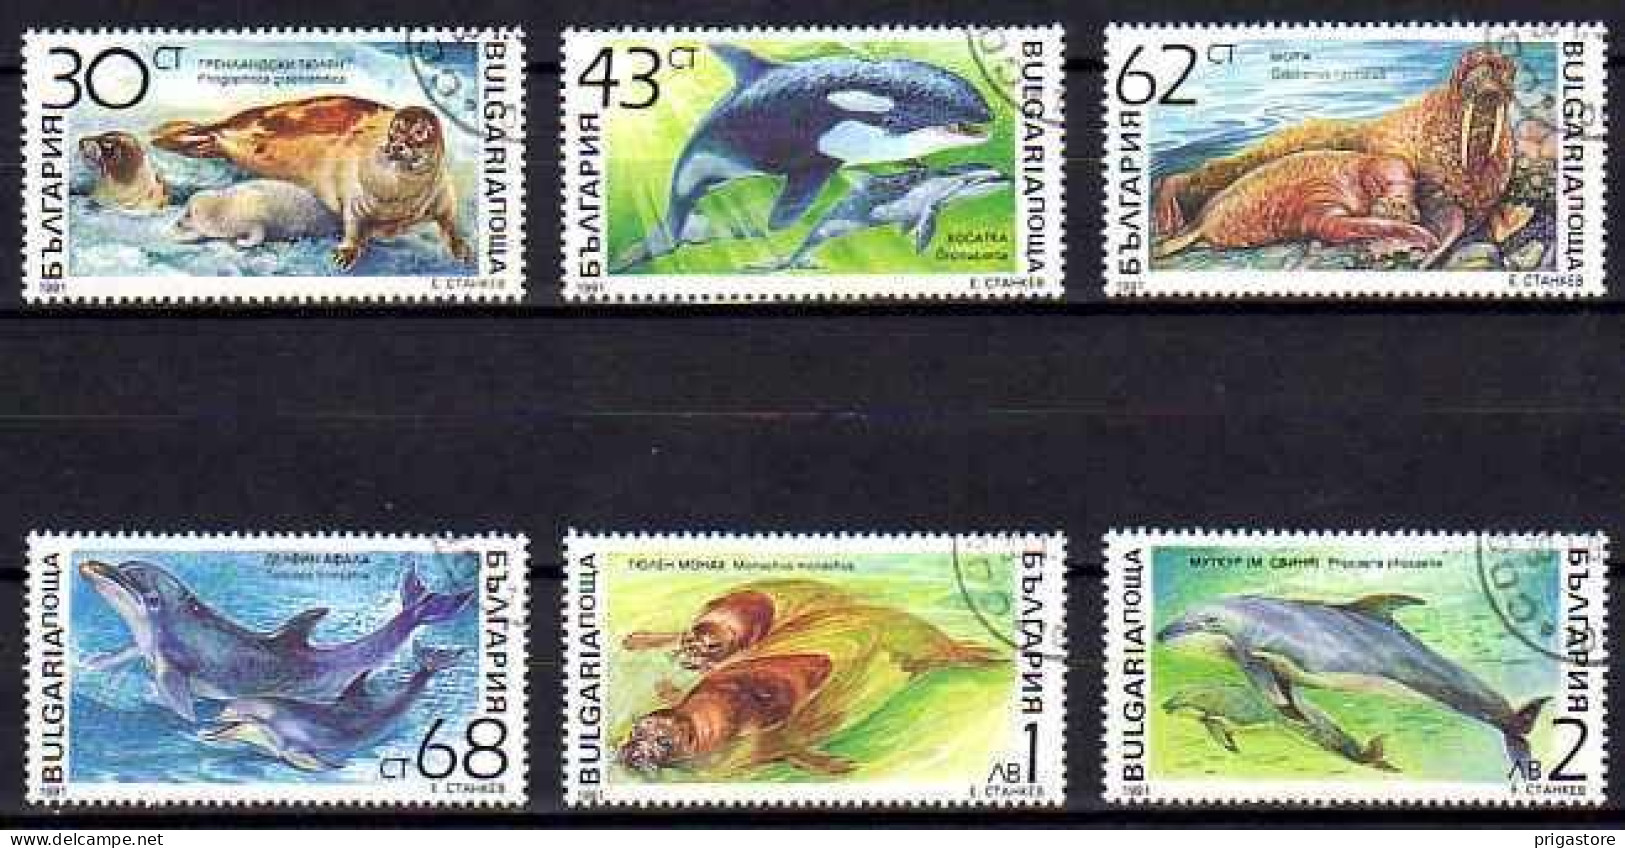 Bulgarie 1991 Animaux Mammifères Marins (72) Yvert N° 3424 à 3429 Oblitéré Used - Used Stamps